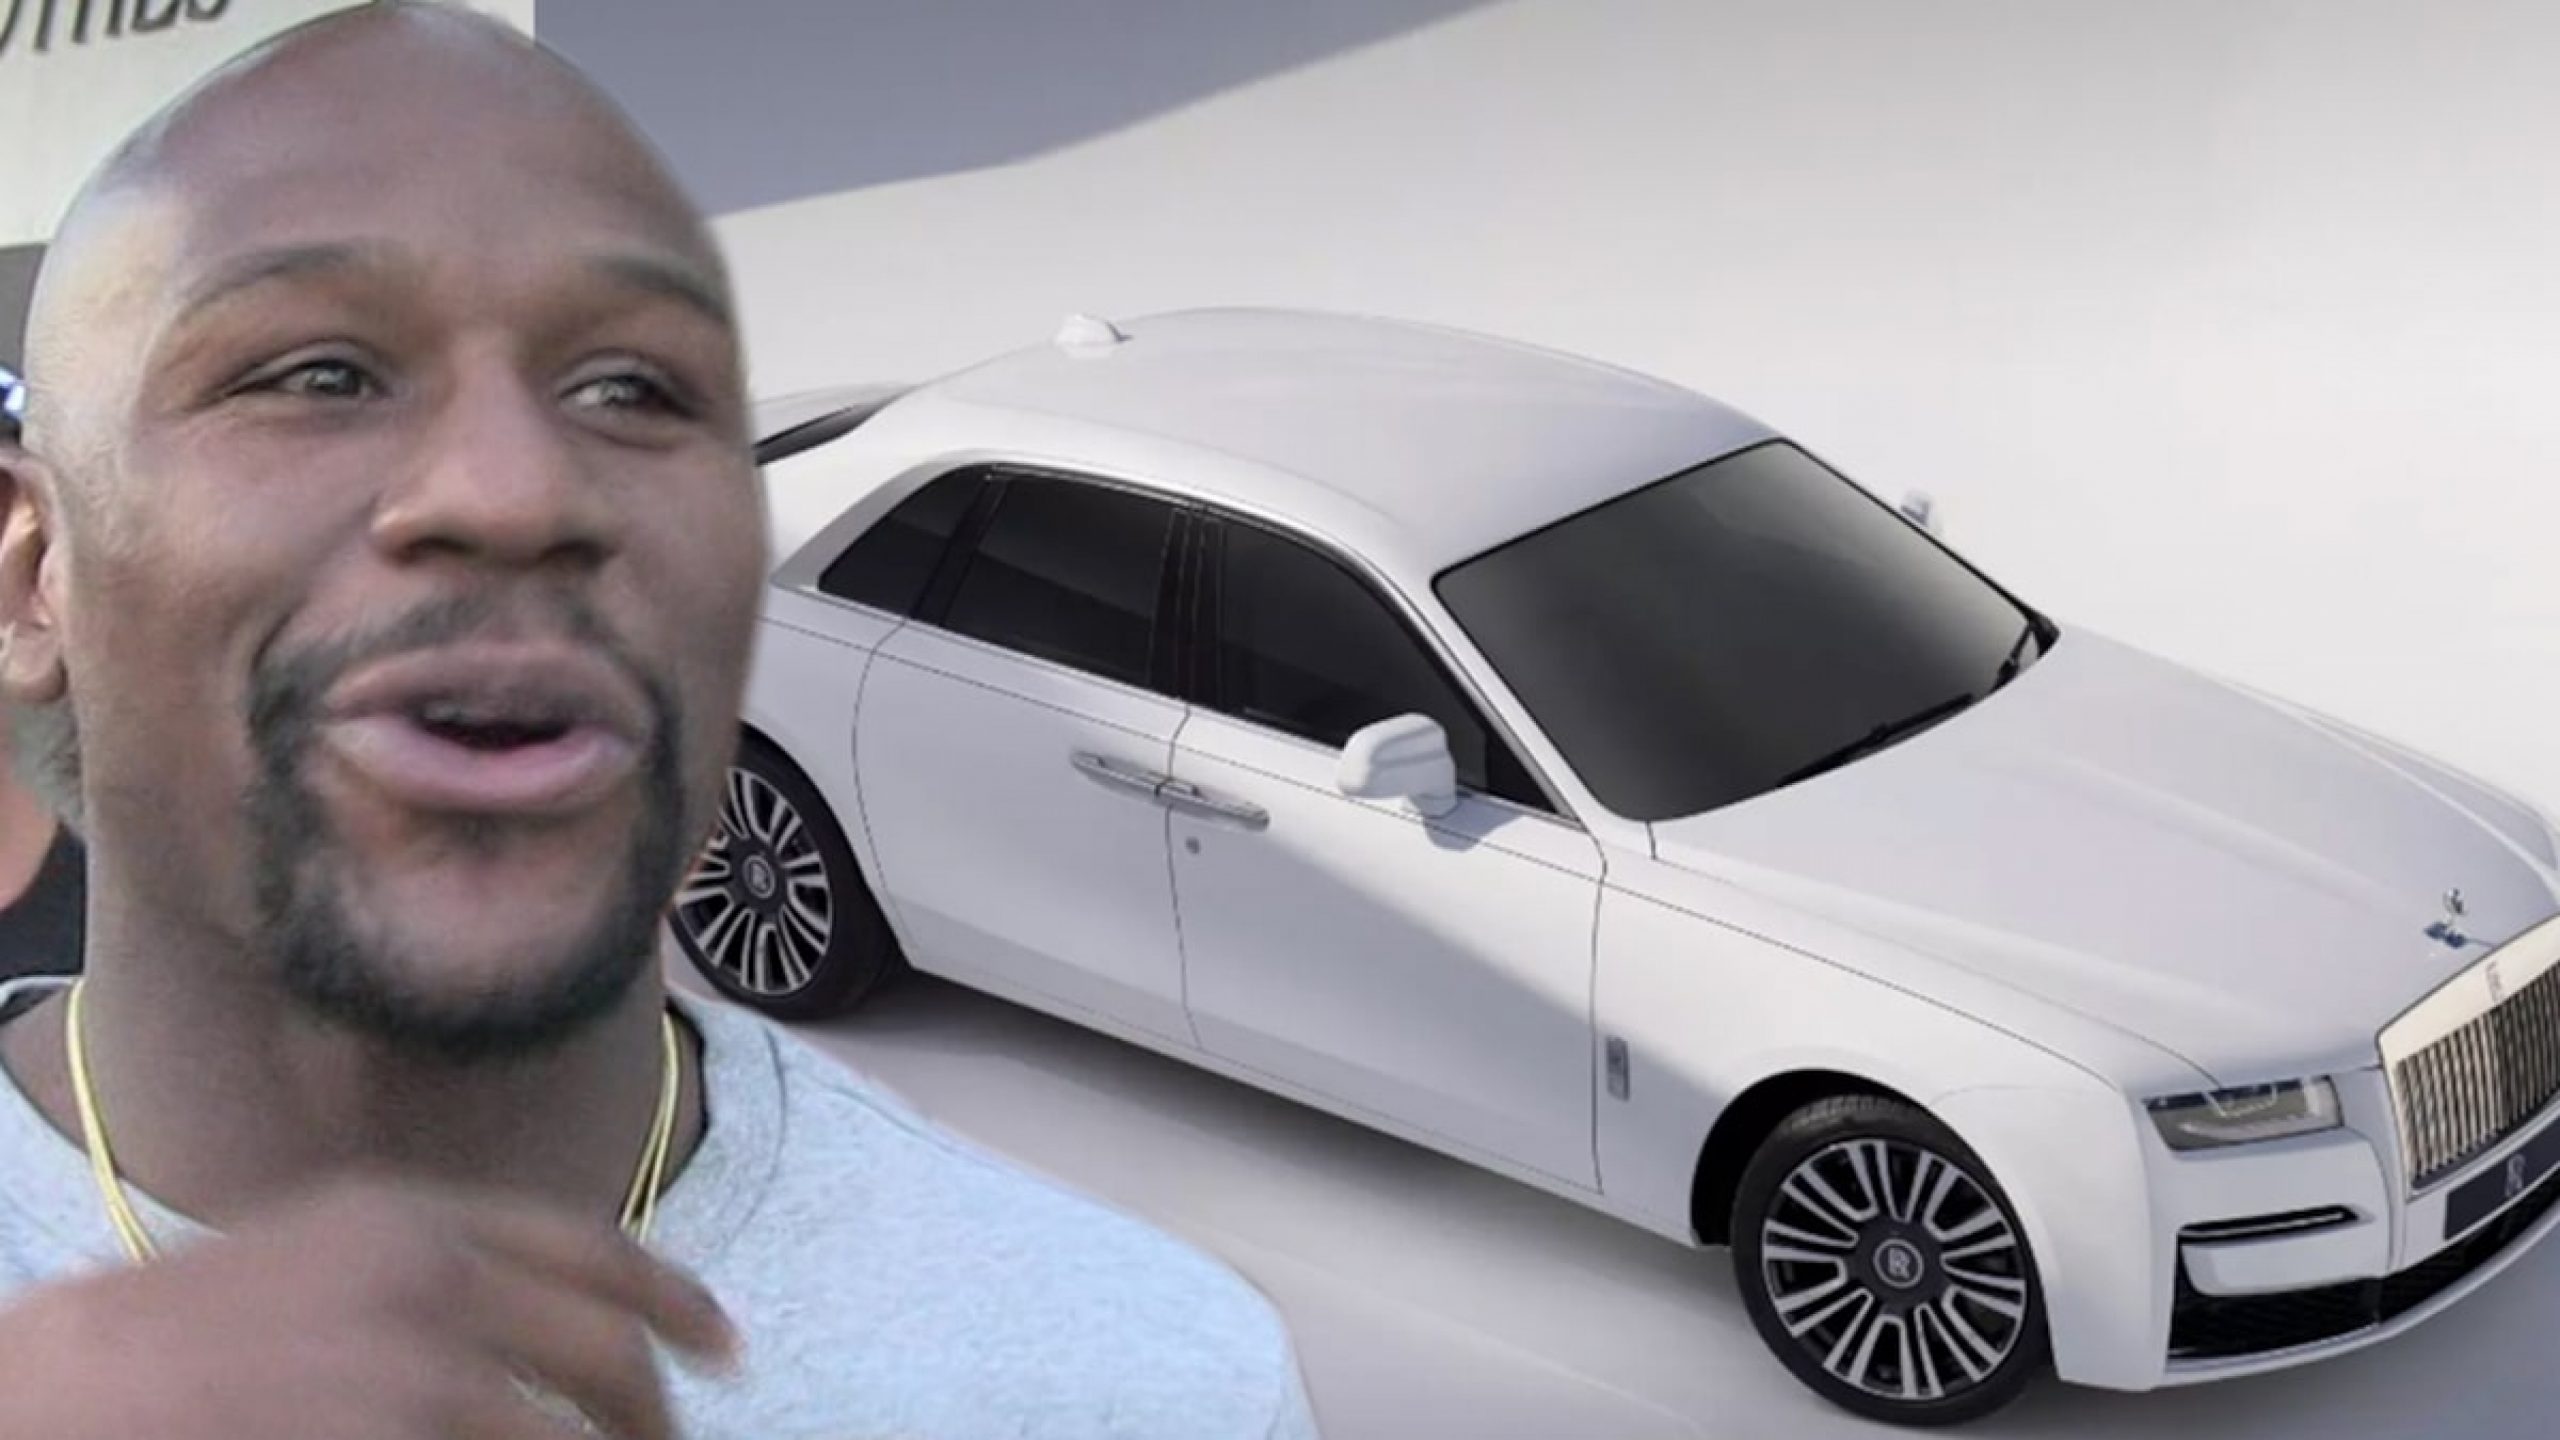 Floyd Mayweather Drops $1 Million On Cars for His Inner Circle, Rolls-Royce for Himself